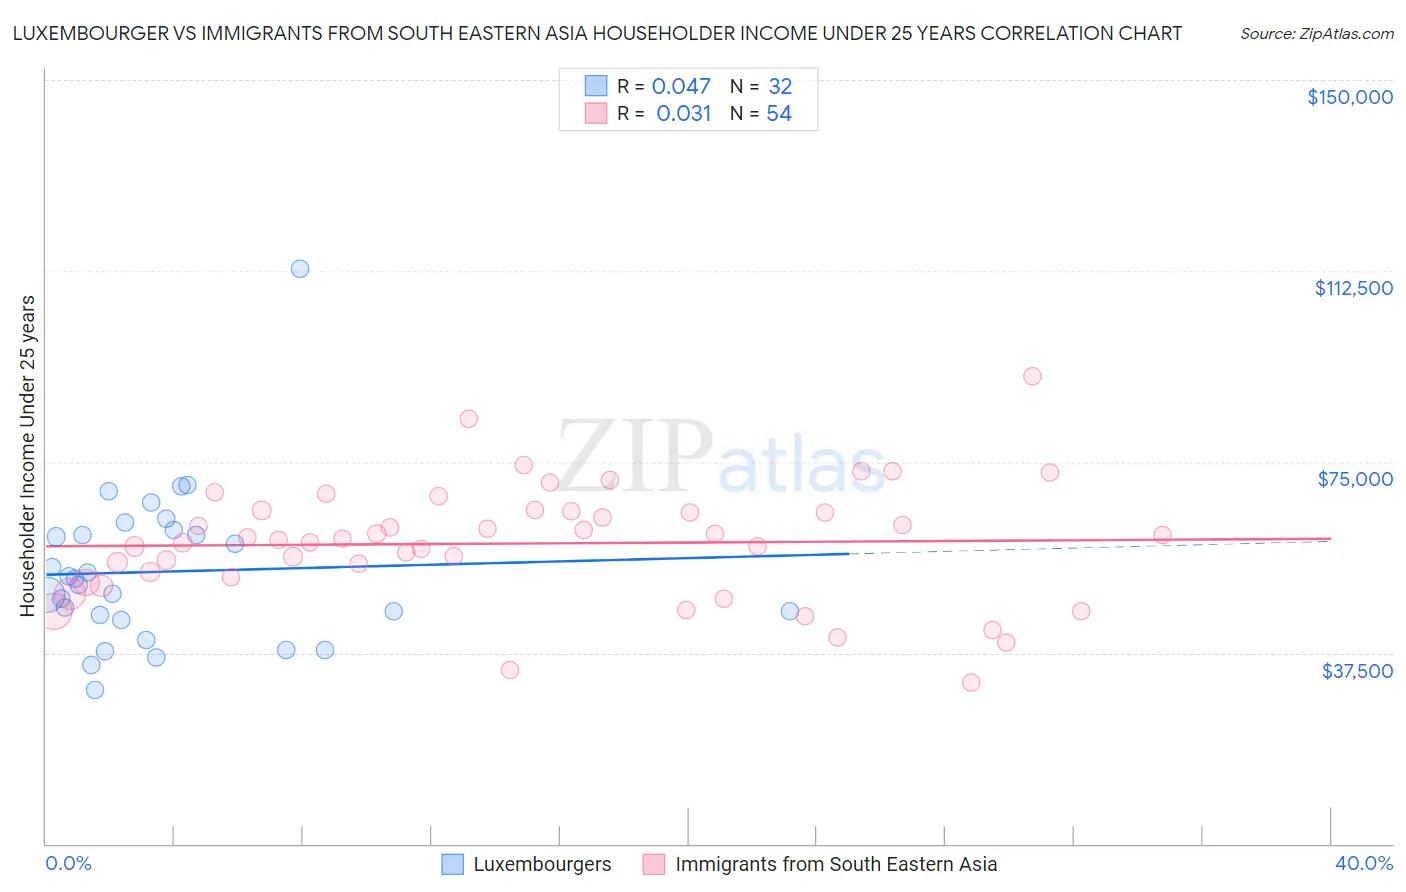 Luxembourger vs Immigrants from South Eastern Asia Householder Income Under 25 years